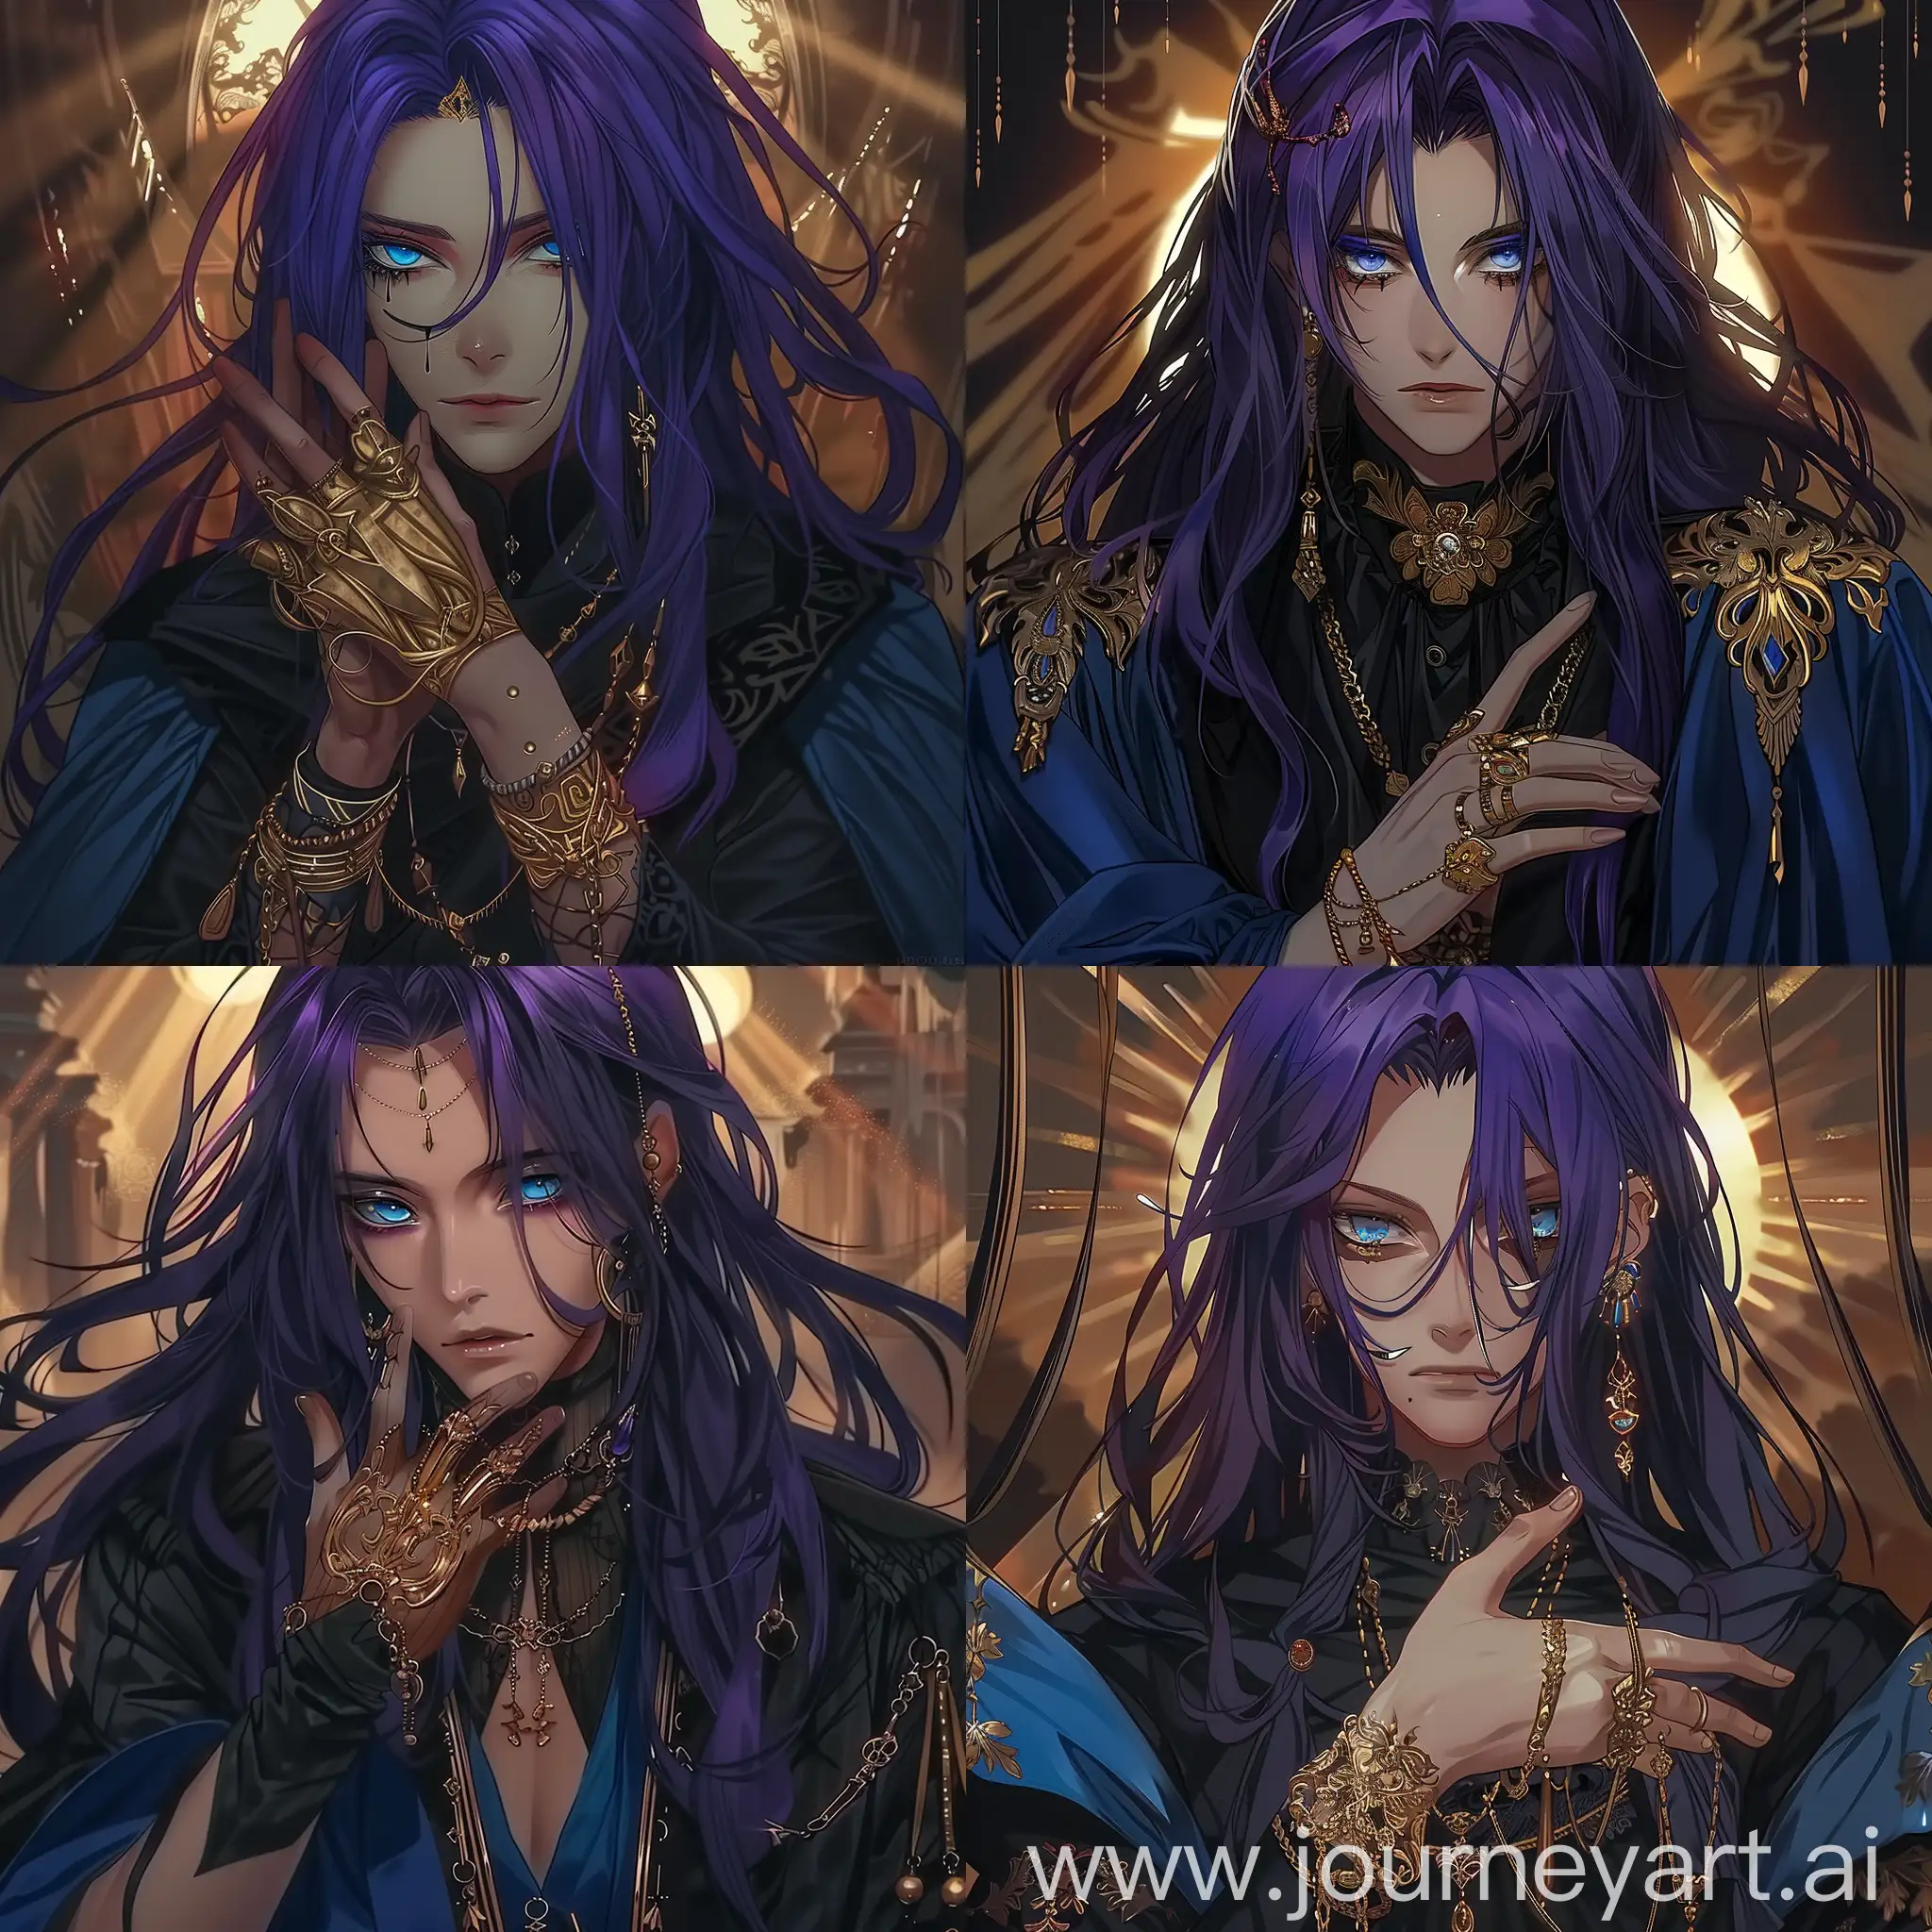 Feminine looking male, 
Long purple hair, blue eyes with a soulless stare and no highlights, 
many golden accessories/jewelry, high quality, detailed, little bit darker skin, emotionless, elegant, mysterious, serious, calm, ethereal, victorian gothic/Ouija styled black clothing with dark blue lining, proportional hands, only 5 fingers on each hand, detailed hands, proportionate hands, masculine and feminine, slim-ish body, Dark, detailed, high quality, impressive lighting, dim overall lighting, sun rays, mysterious, stunning, desert royalty type 